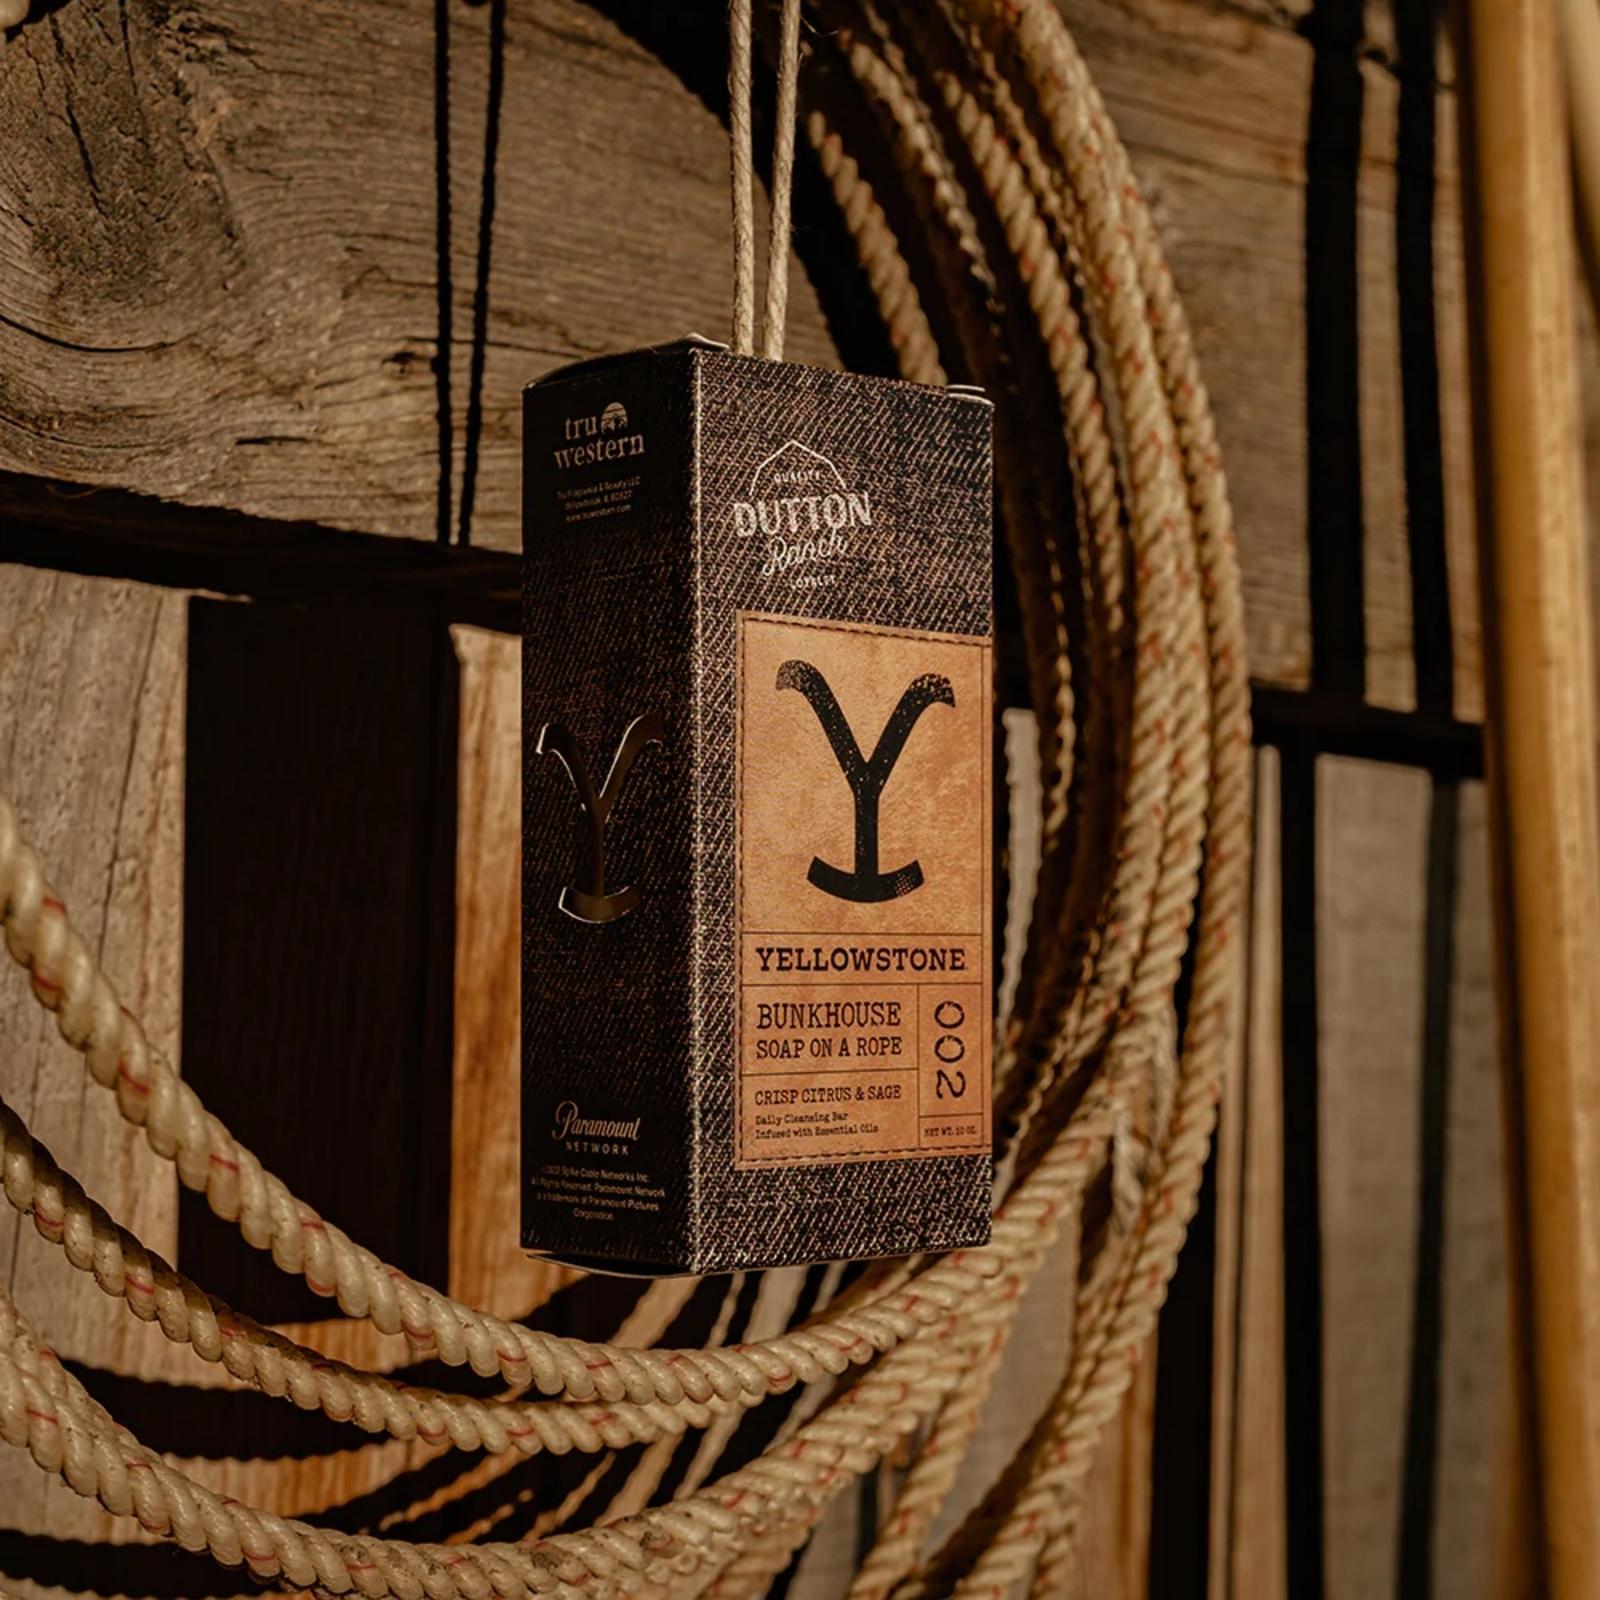 Tru Western Yellowstone Bunkhouse Soap on a Rope